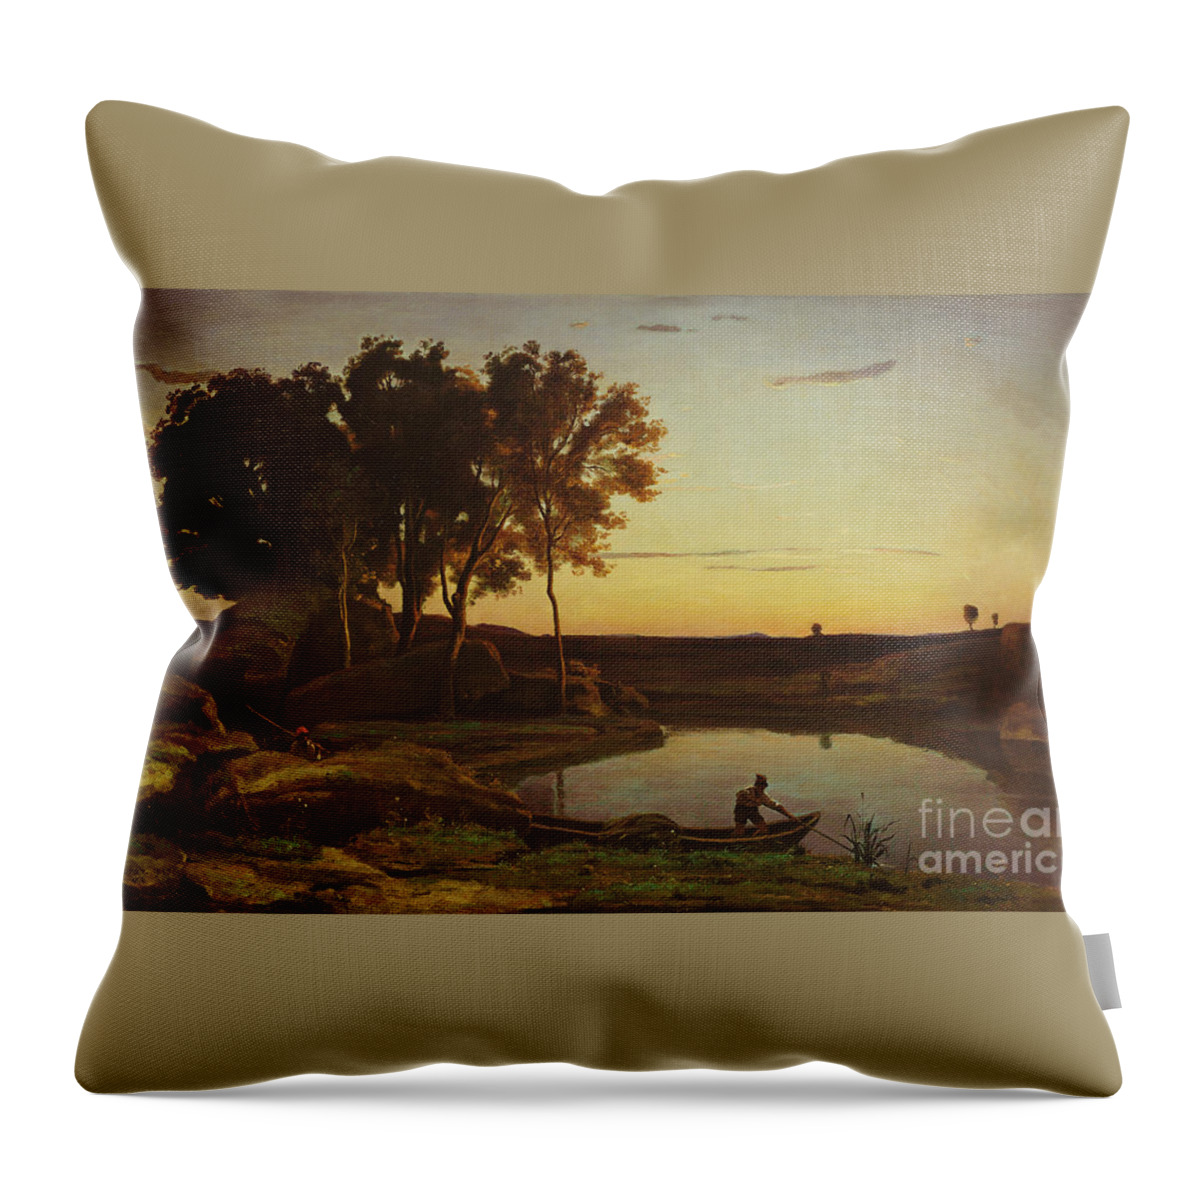 Jean-baptiste-camille Corot Throw Pillow featuring the painting Landscape With Lake And Boatman by MotionAge Designs